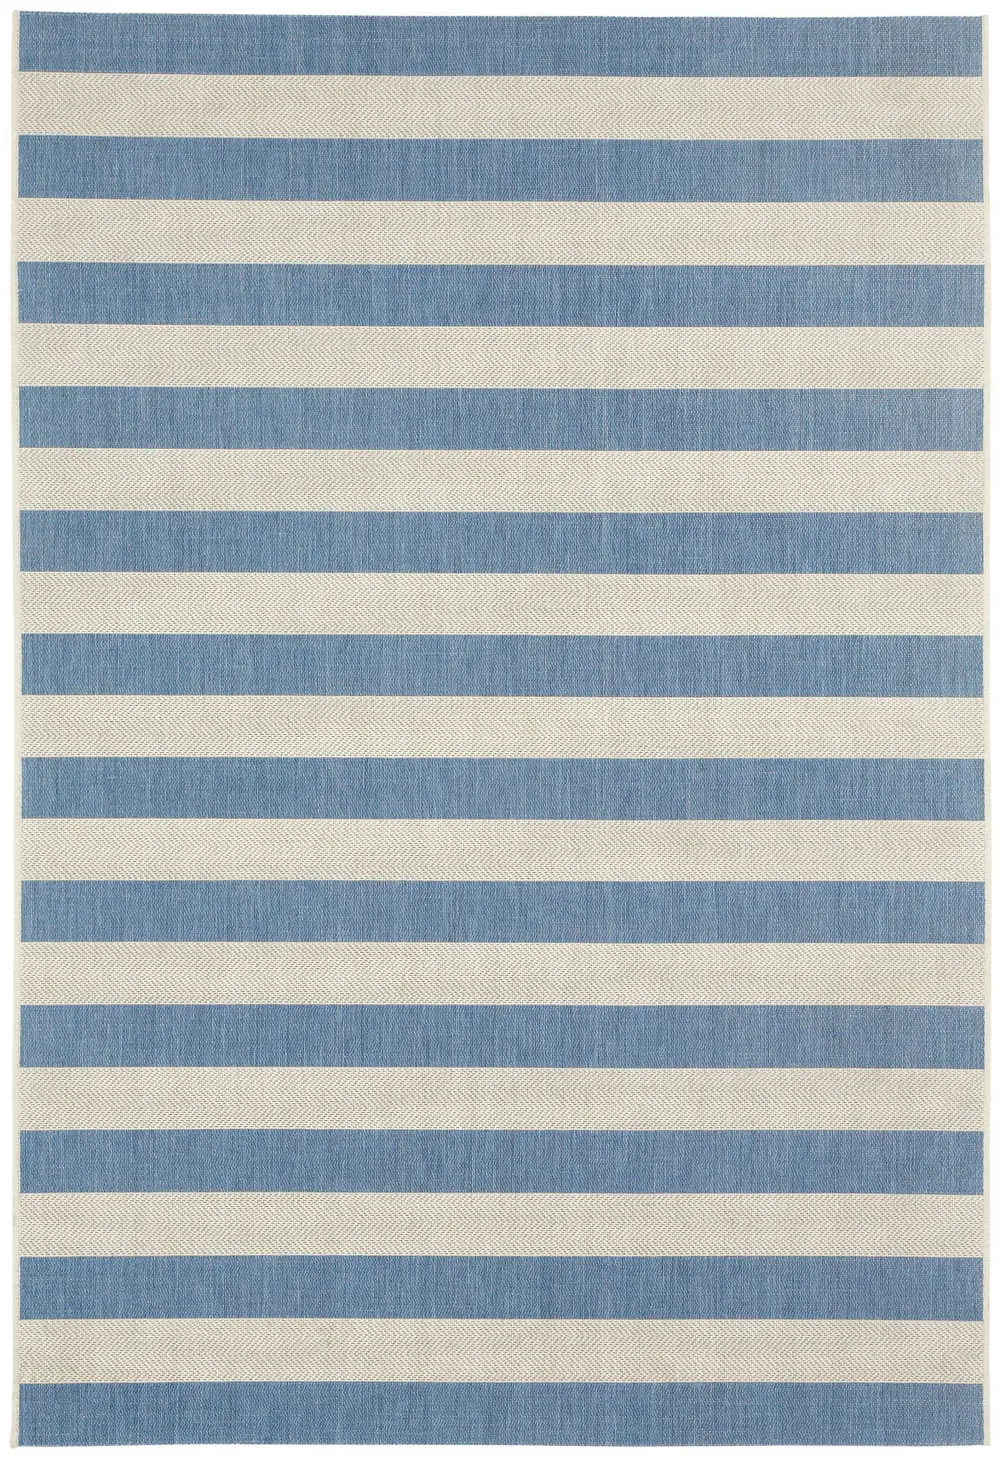 473044035 4 x 6 Small Striped Capri Blue Indoor-Outdoor Rug - Finesse-1